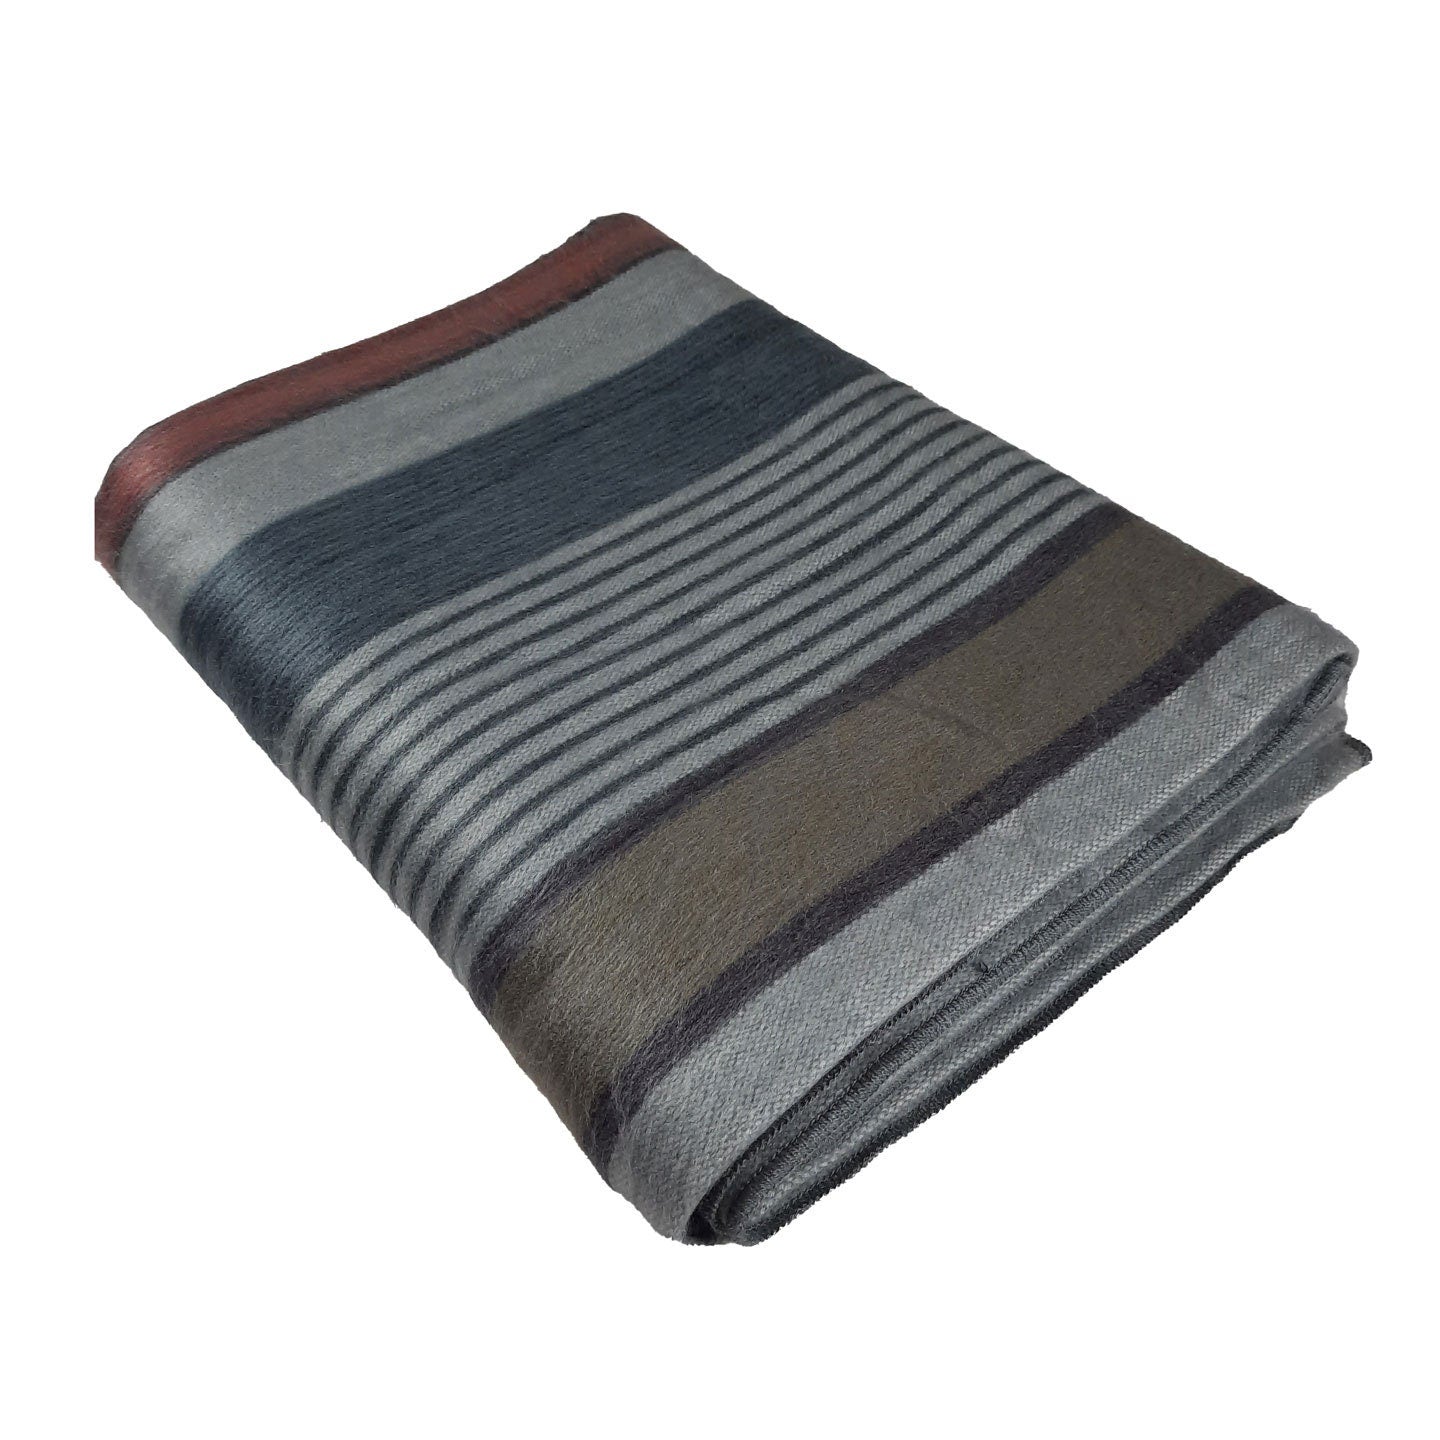 Housewarming Gift - Snuggle Up with this Super Soft Alpaca Blanket - Gray Silver Stripes